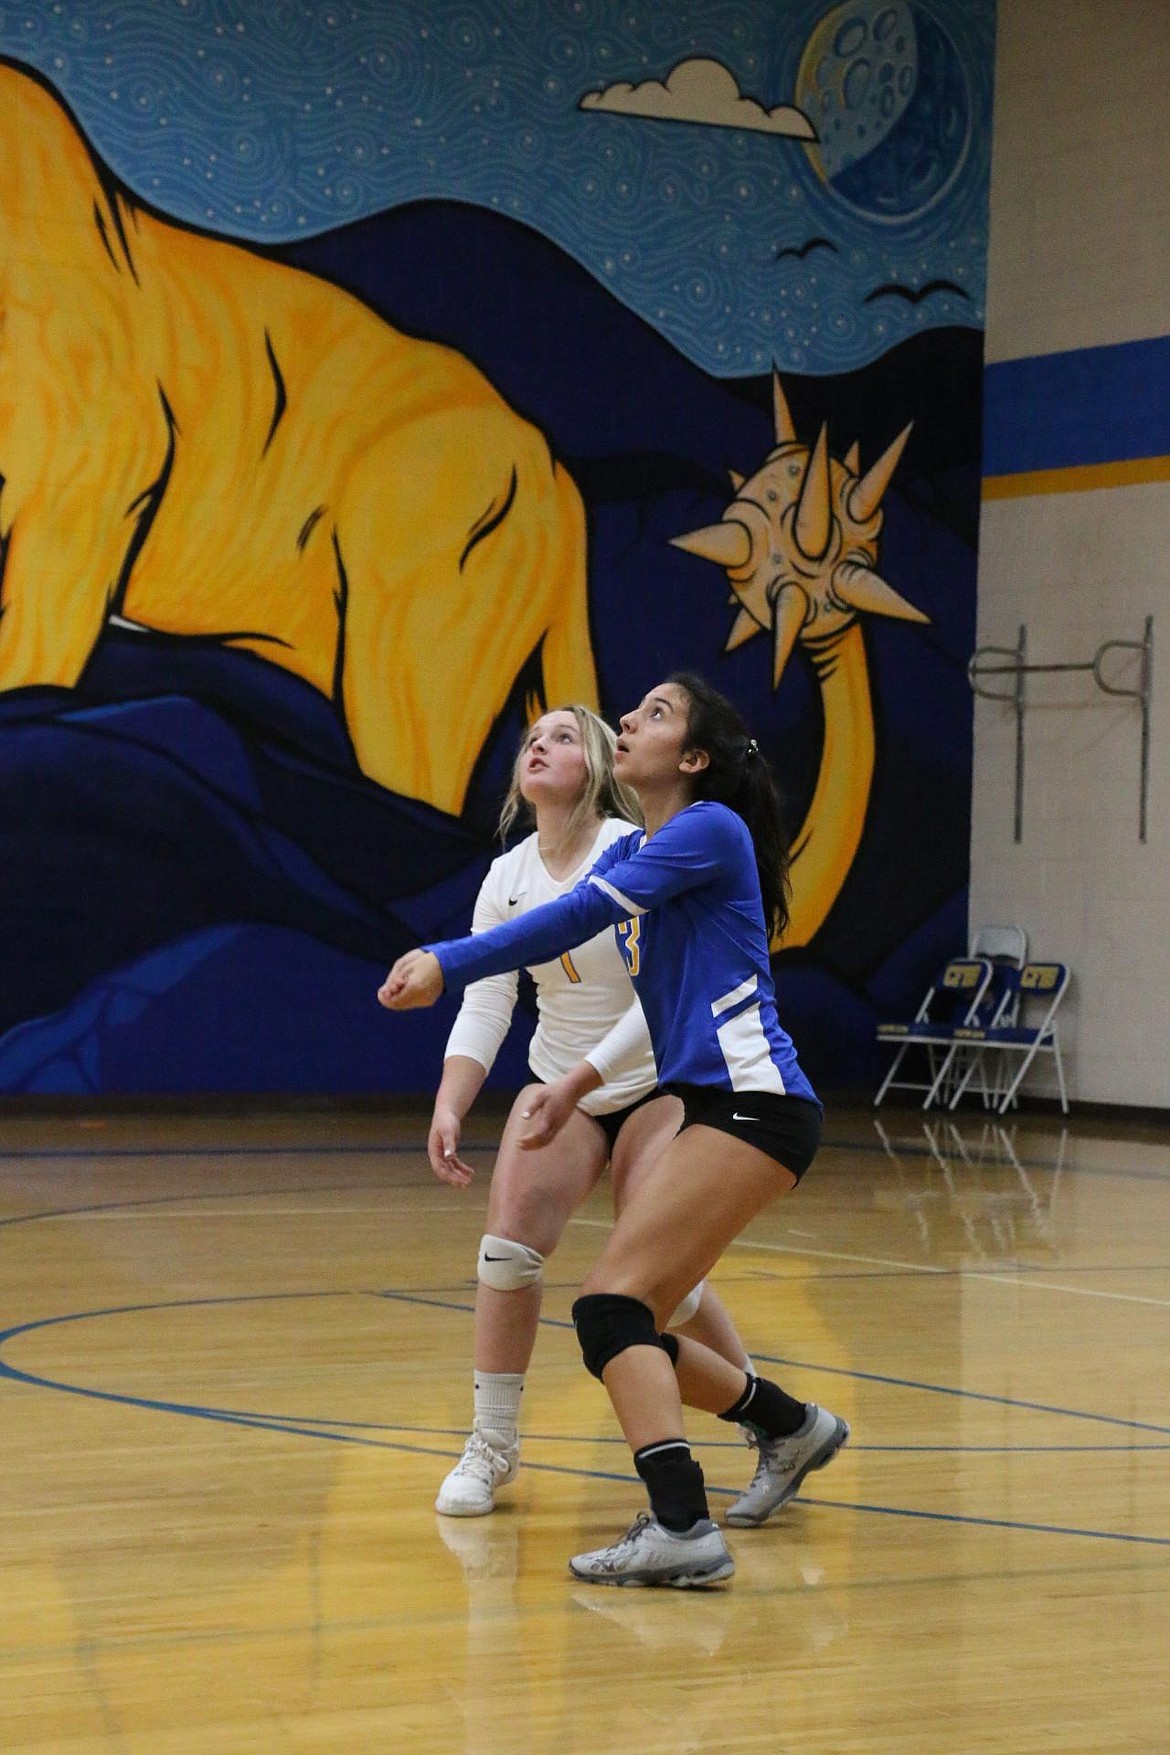 Sophomore Emily Myers prepares to receive a ball during Tuesday's match against Kootenai.